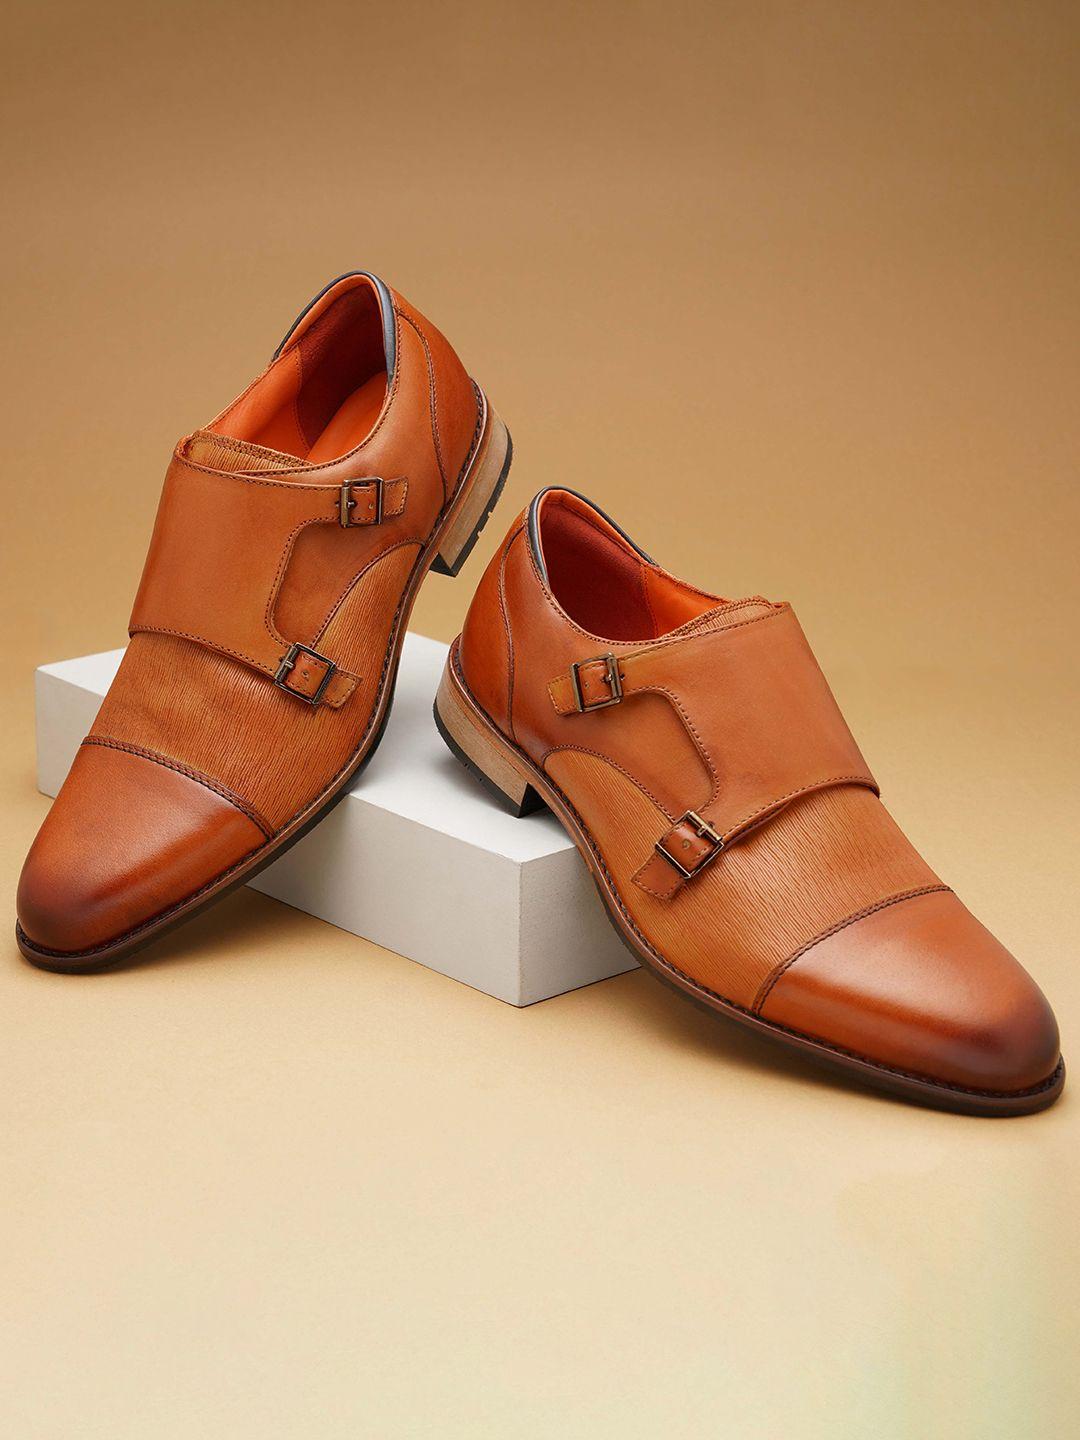 ruosh-men-textured-leather-formal-monk-shoes